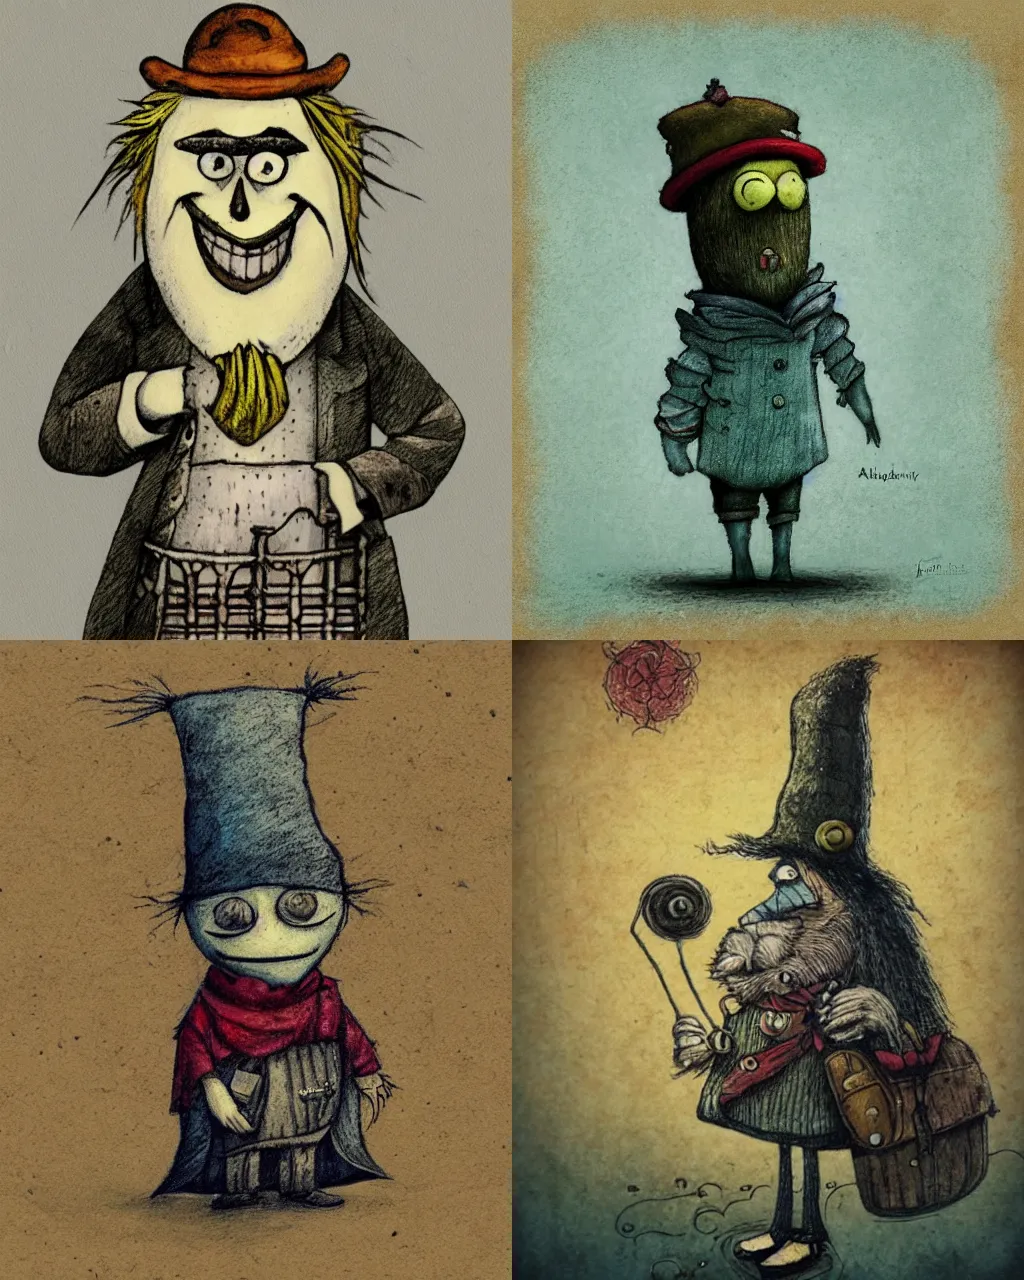 Prompt: Medium shot of a typical character in the style of Alexander Jansson